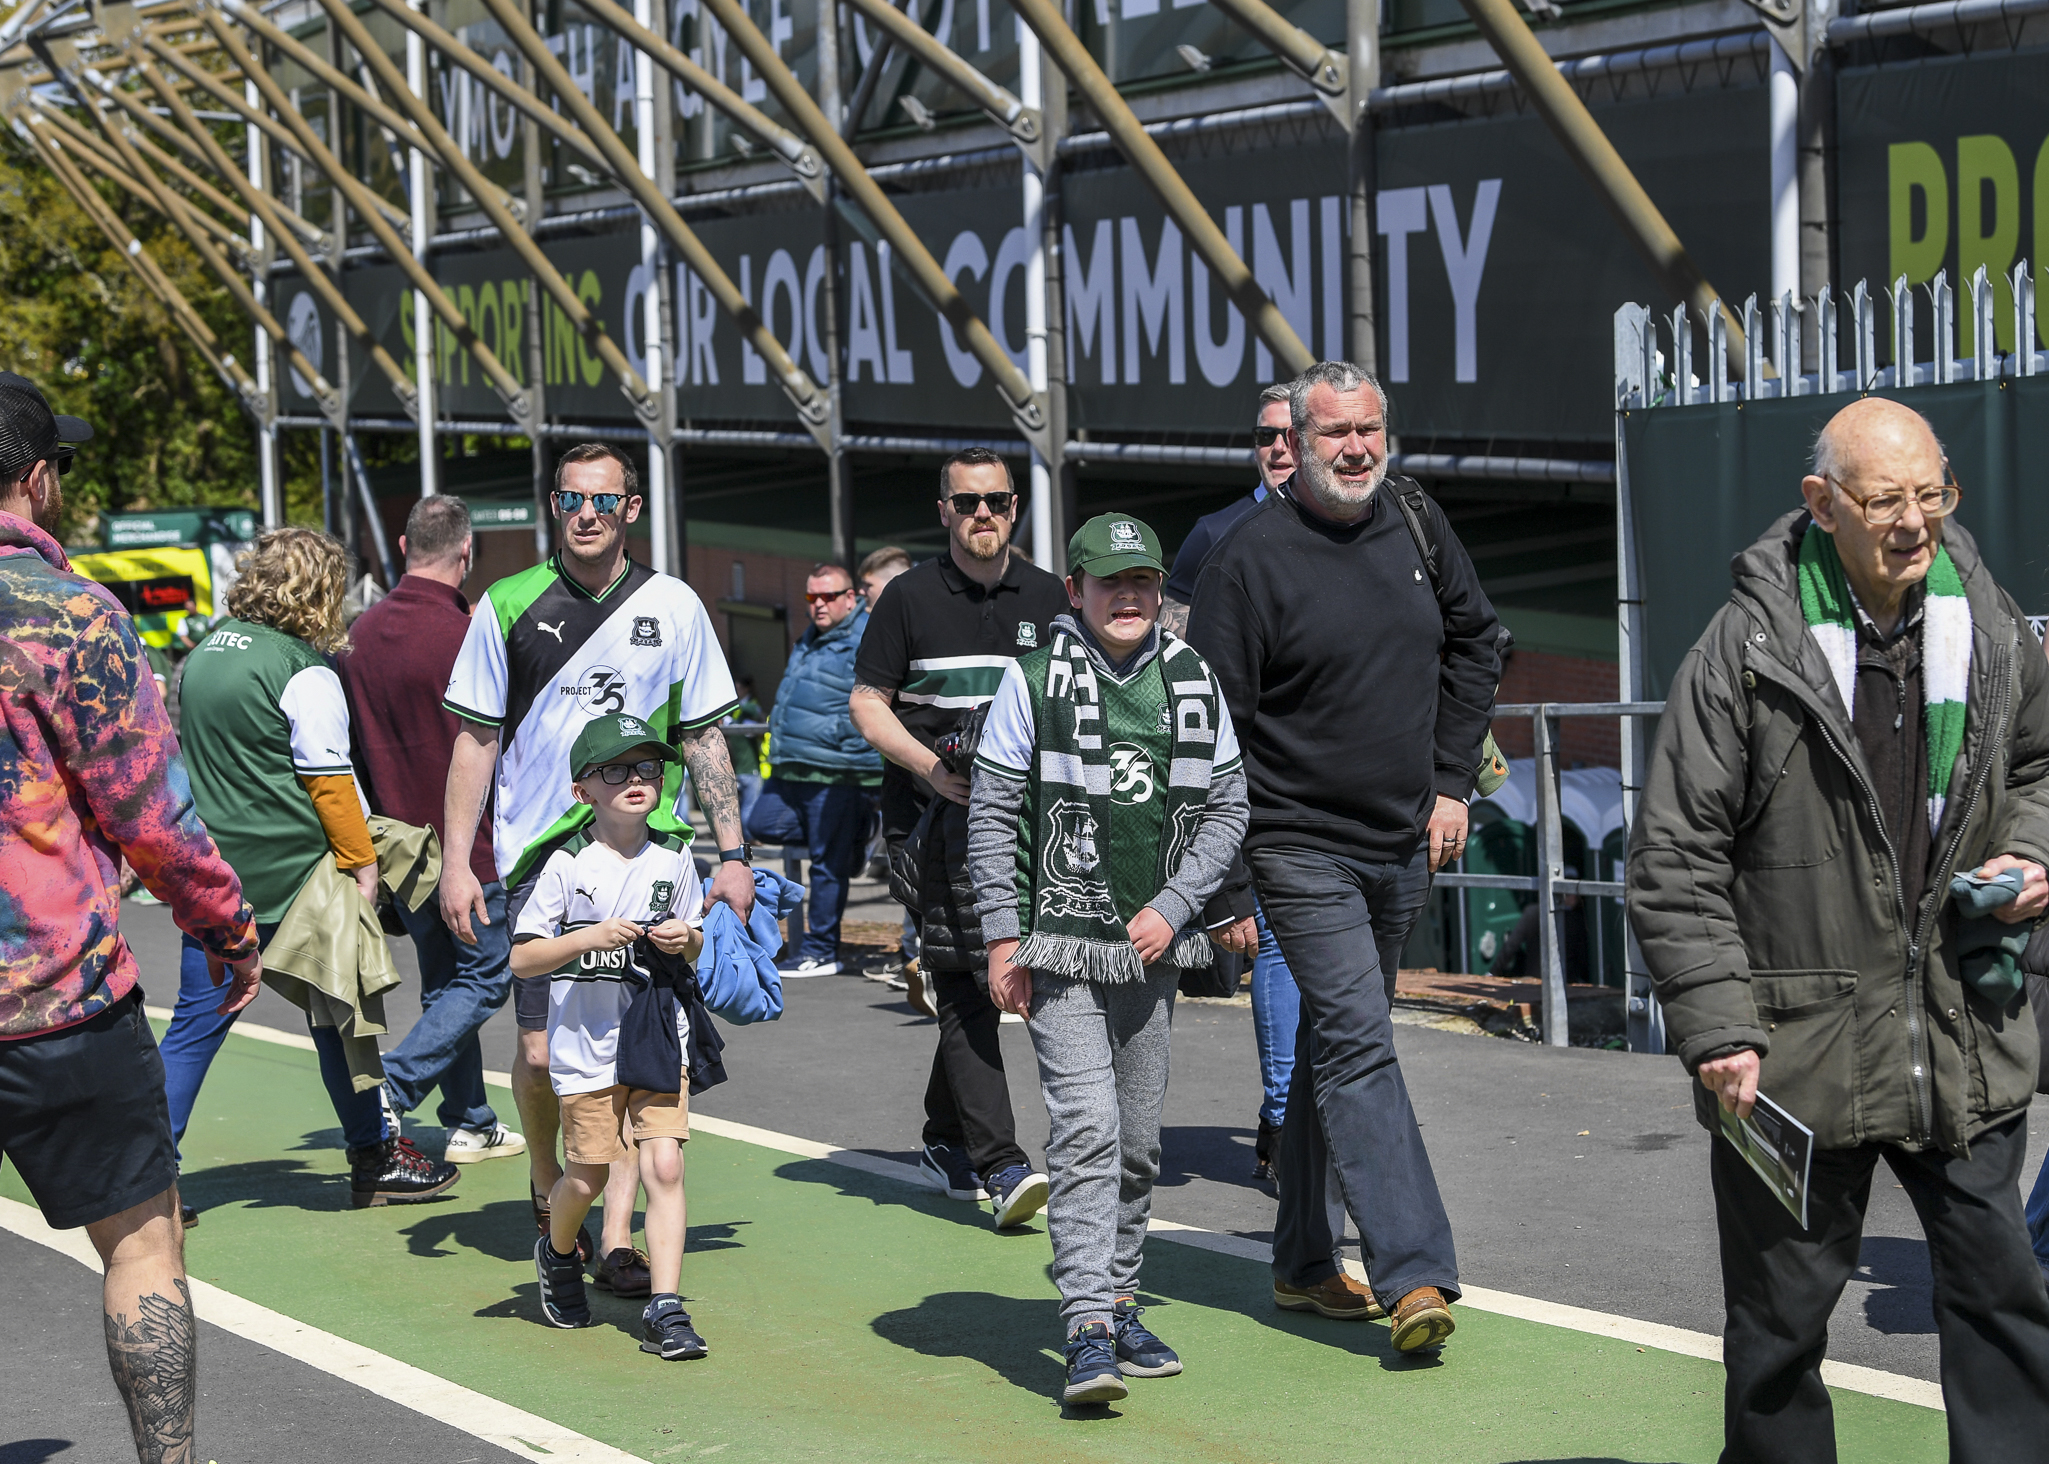 Supporters outside Home Park